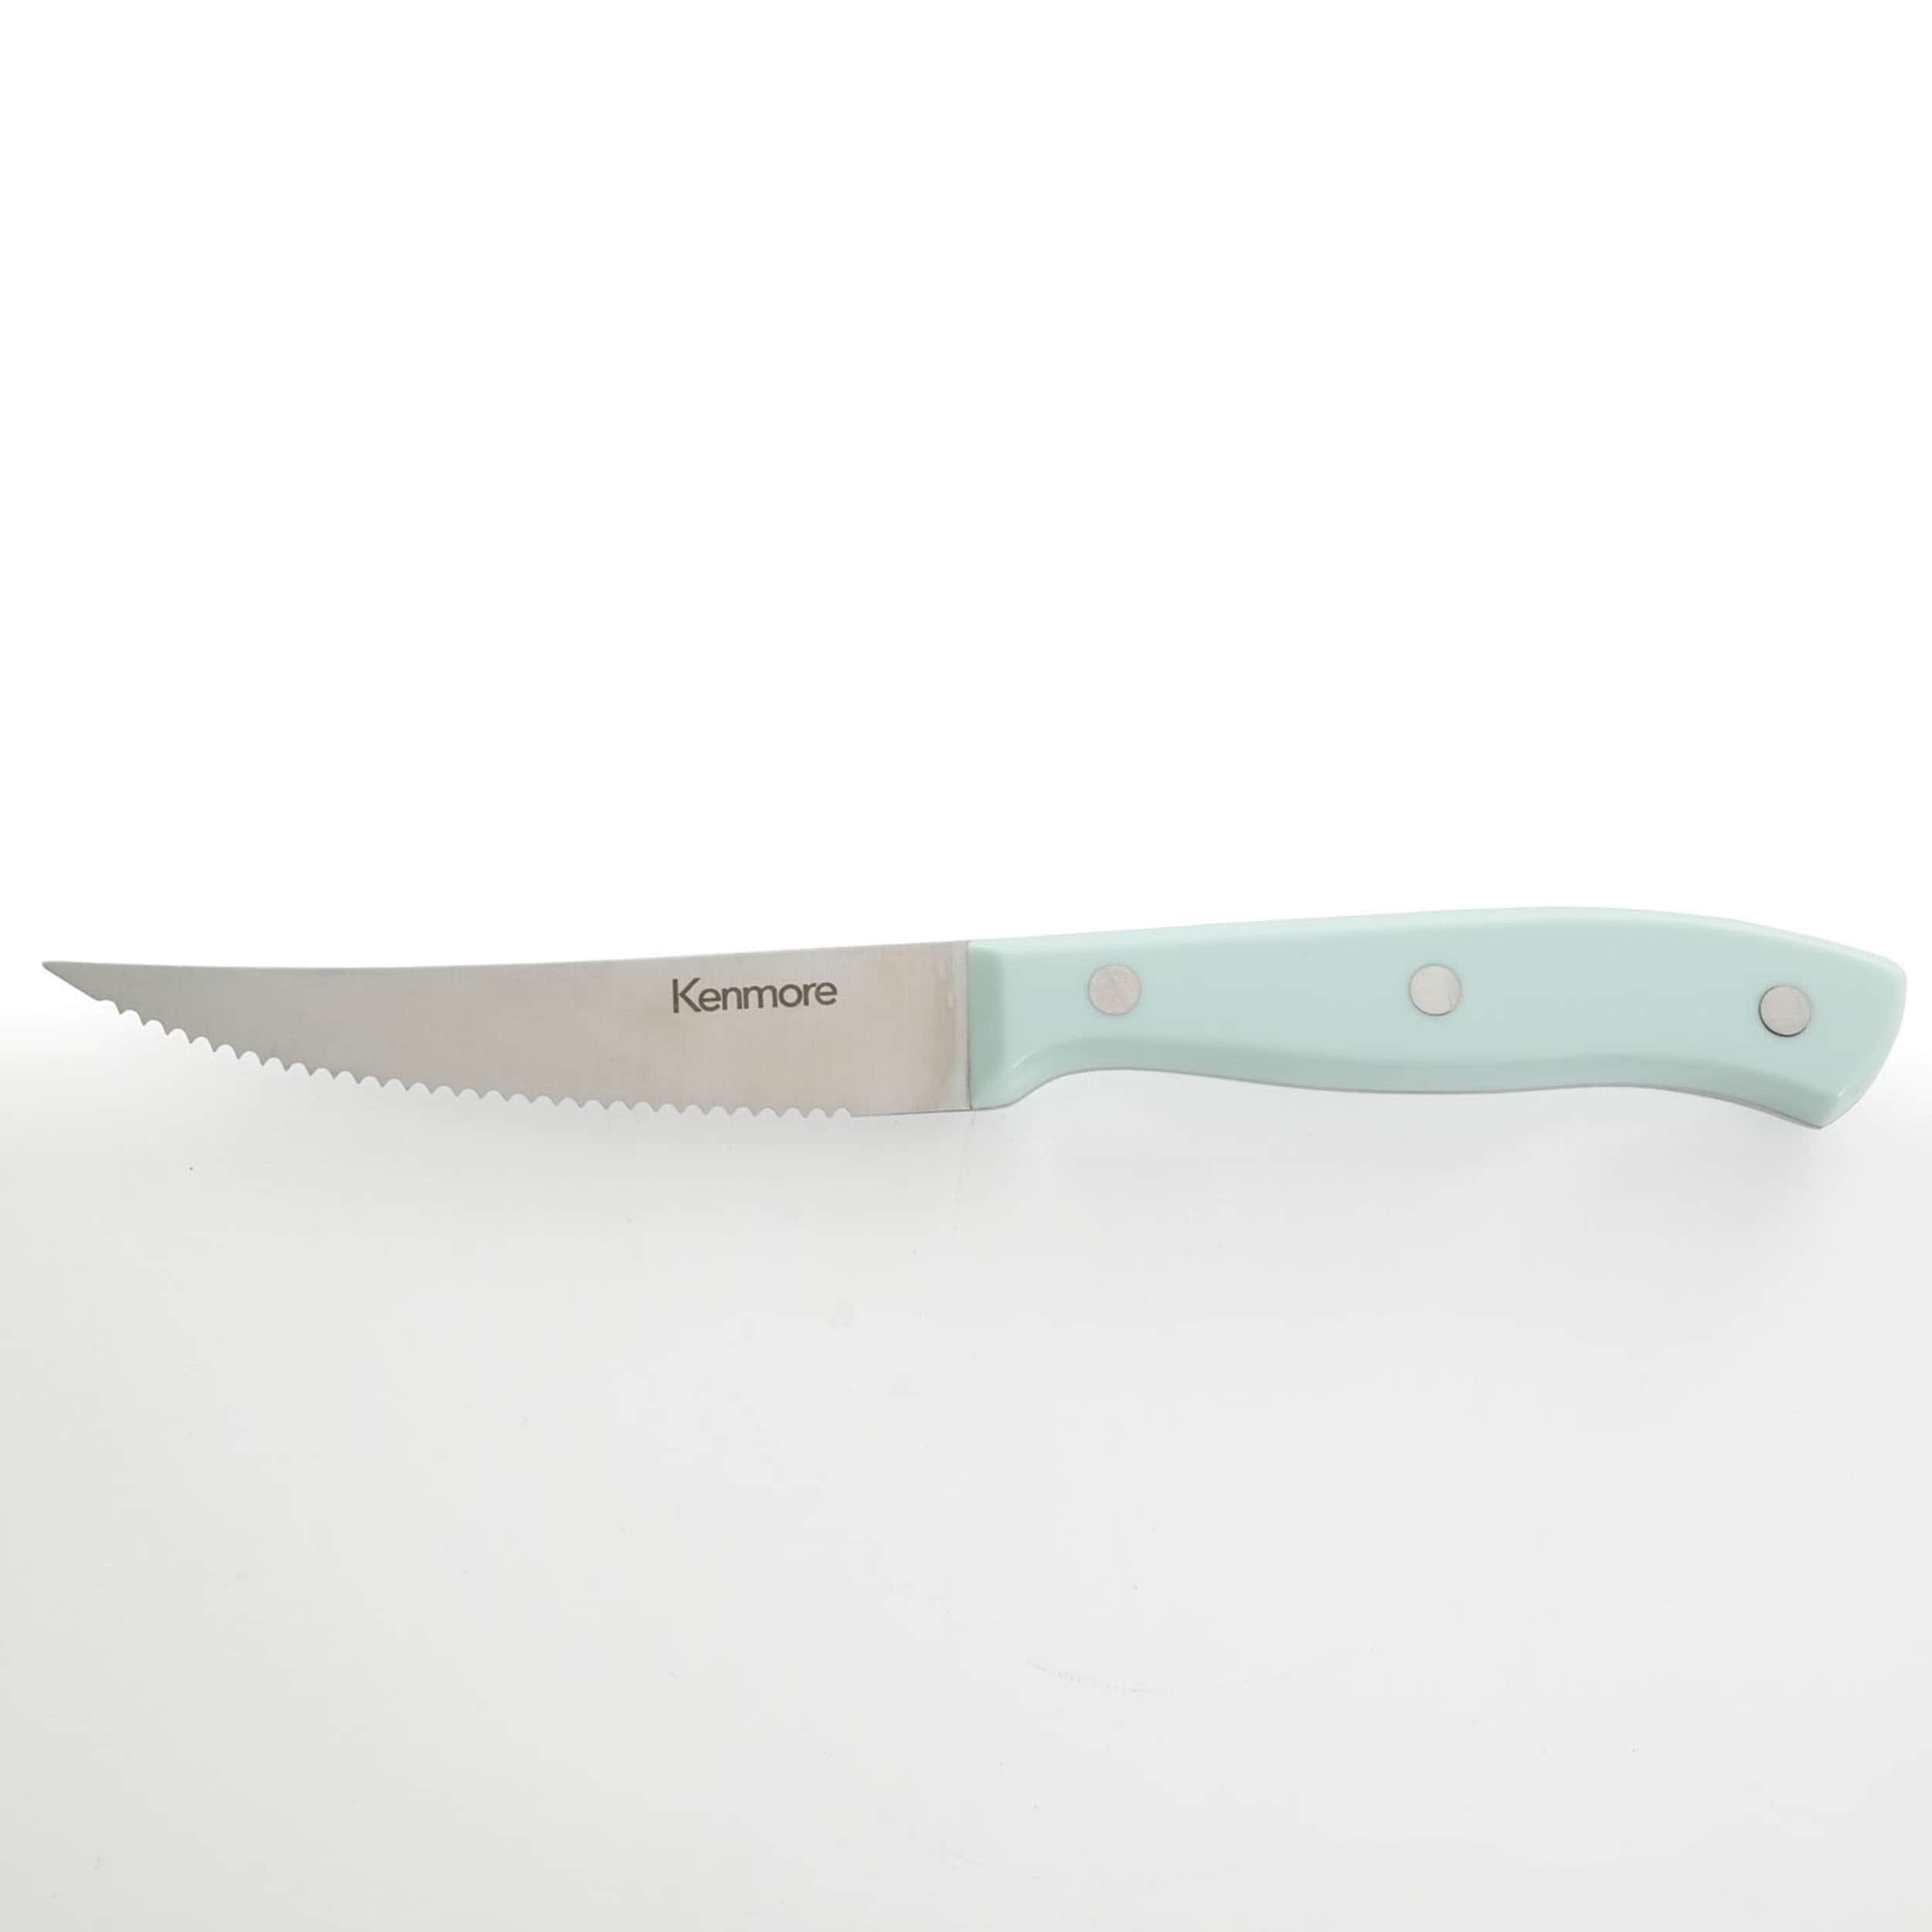 https://ak1.ostkcdn.com/images/products/is/images/direct/d13d093c2dd1c905f3d6eb44bad423d184c948b7/Kenmore-Kane-14Pc-Stainless-Steel-Knife-Set-Glacier-Blue-w--Wood-Block.jpg